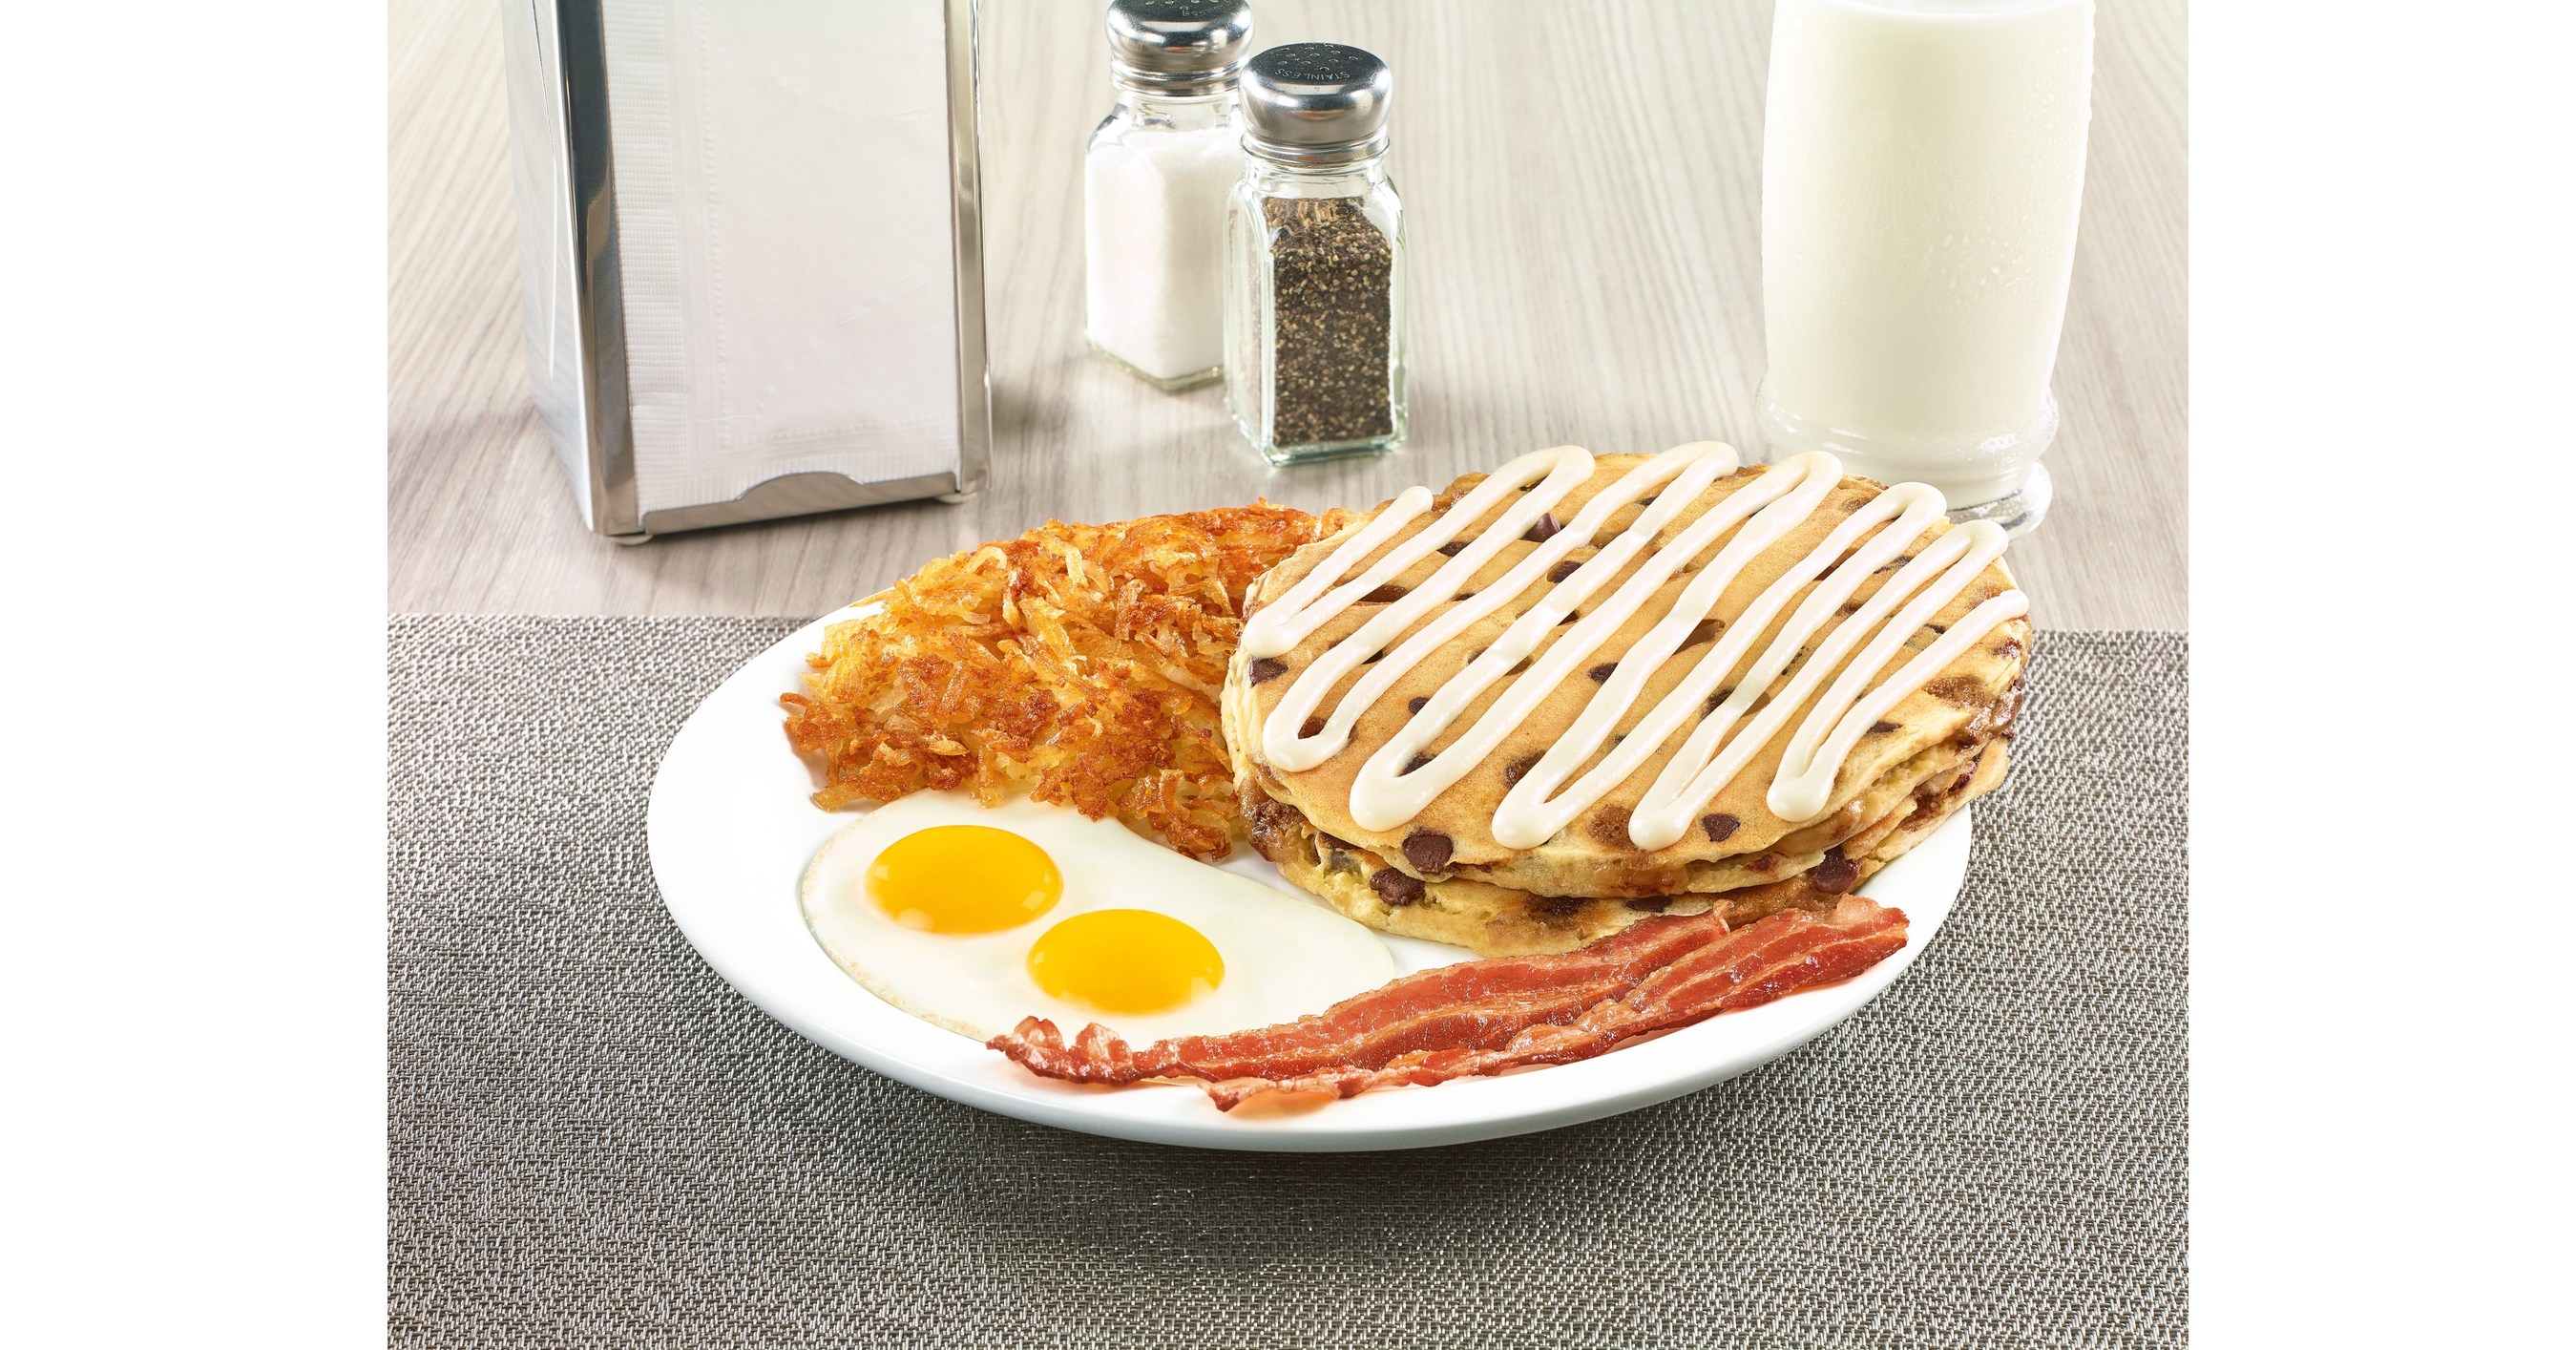 Order Up! Denny's Launches a Fresh New Menu Featuring Food That Jumps off  the Page, Literally